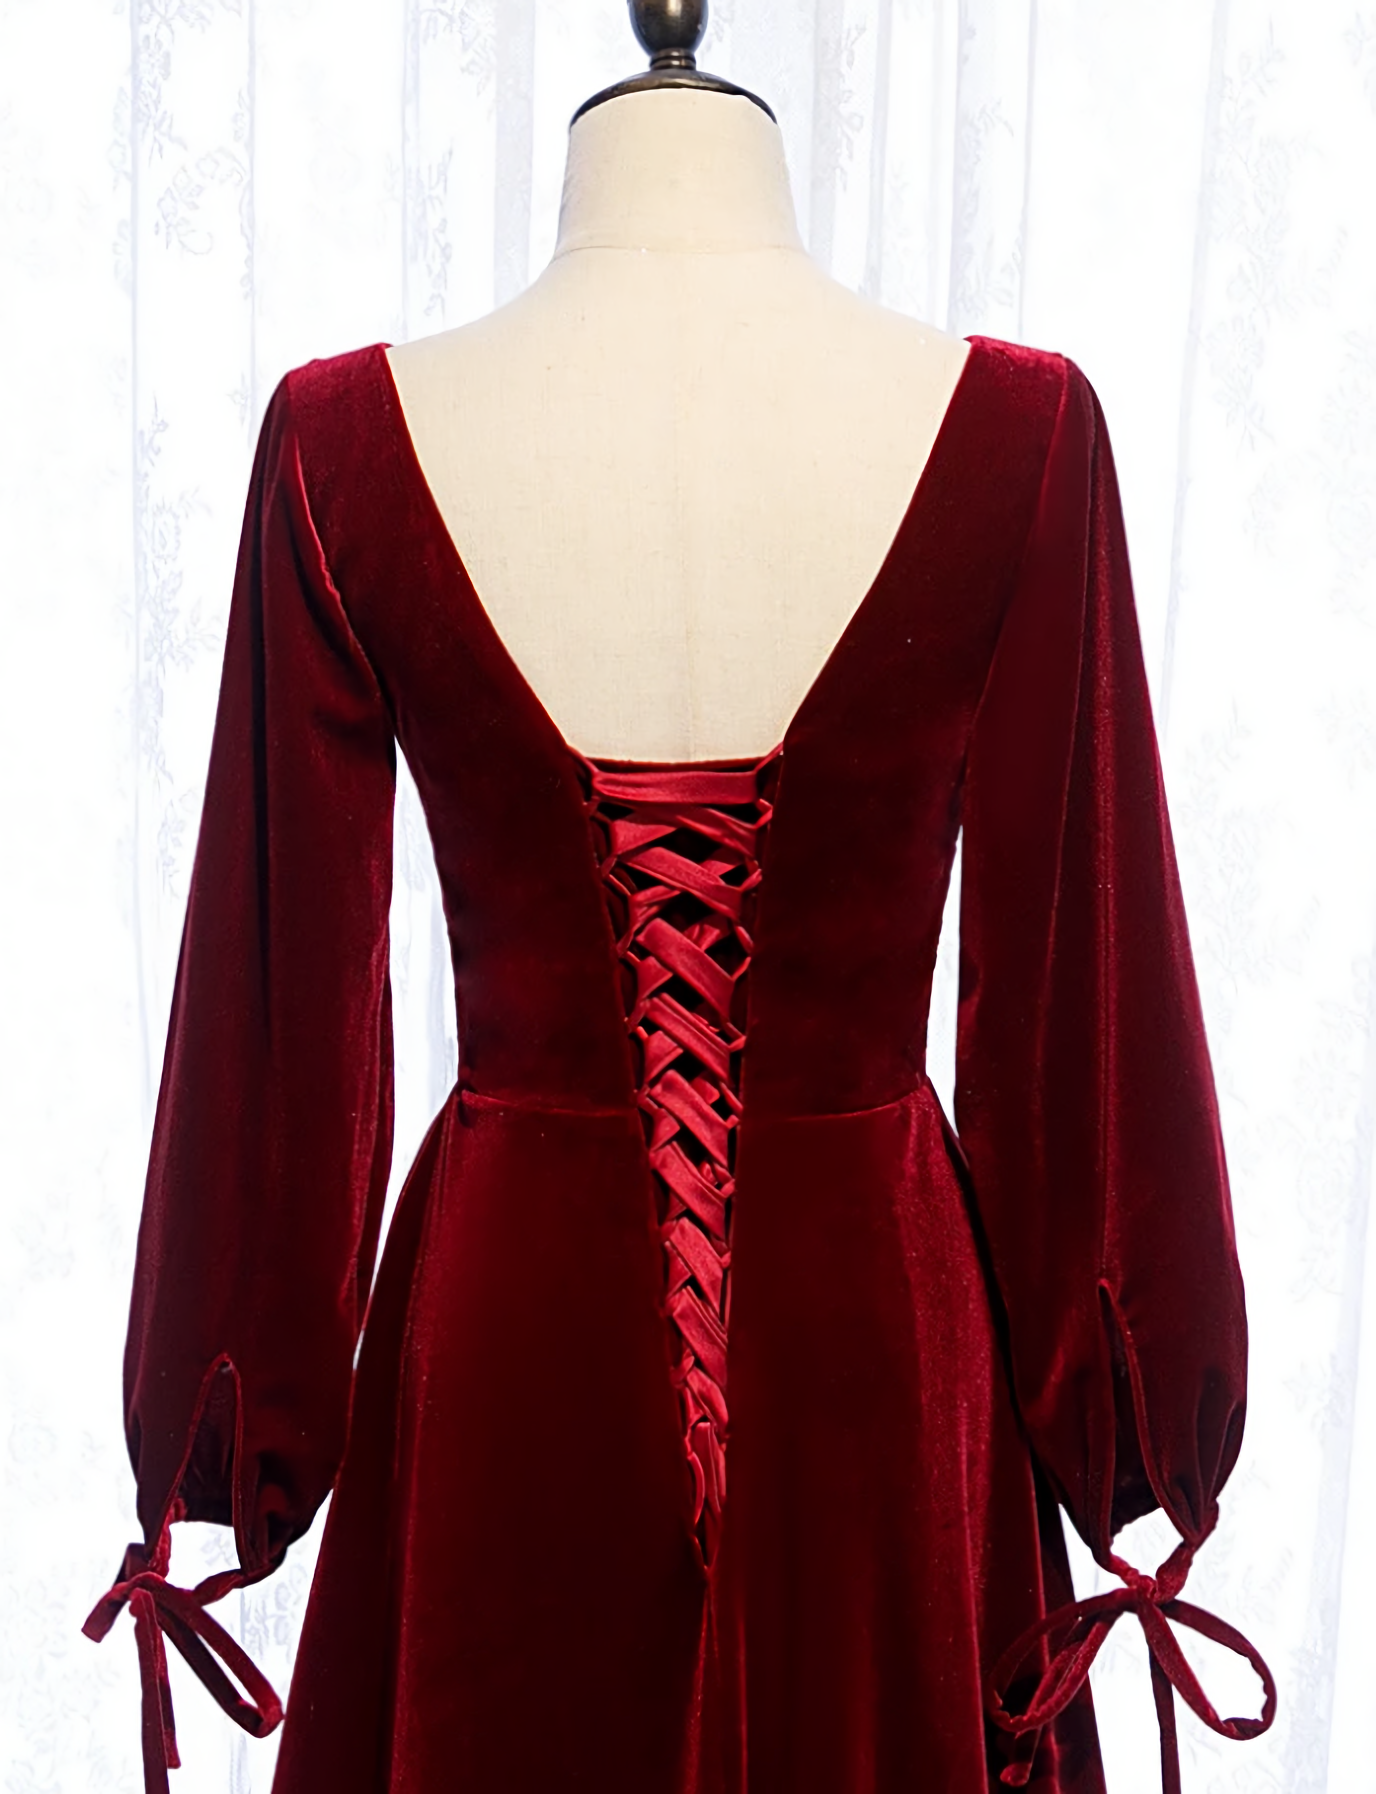 Party Dresses Night, Charming Dark Red Velvet Long Sleeves A Line Party Dress, Party Prom Dress